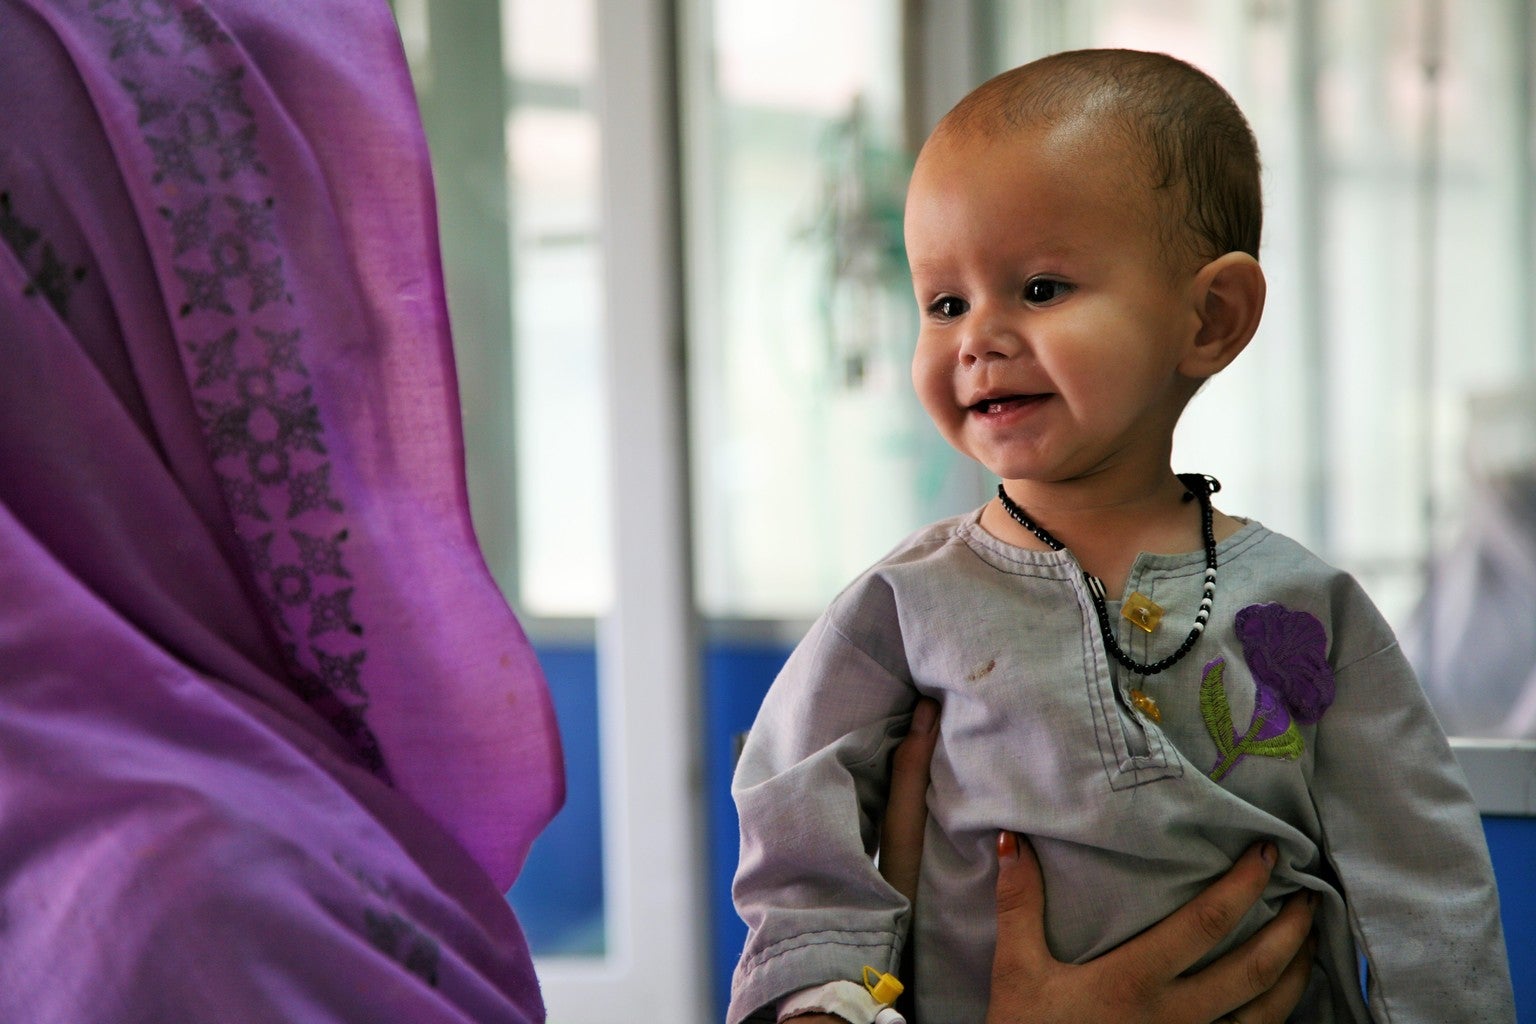 2 year old Samiullha smiles with his mother following UNICEF-supported in-patient treatment for severe acute malnutrition at Indira Gandhi Children’s Hospital in Kabul, Afghanistan.